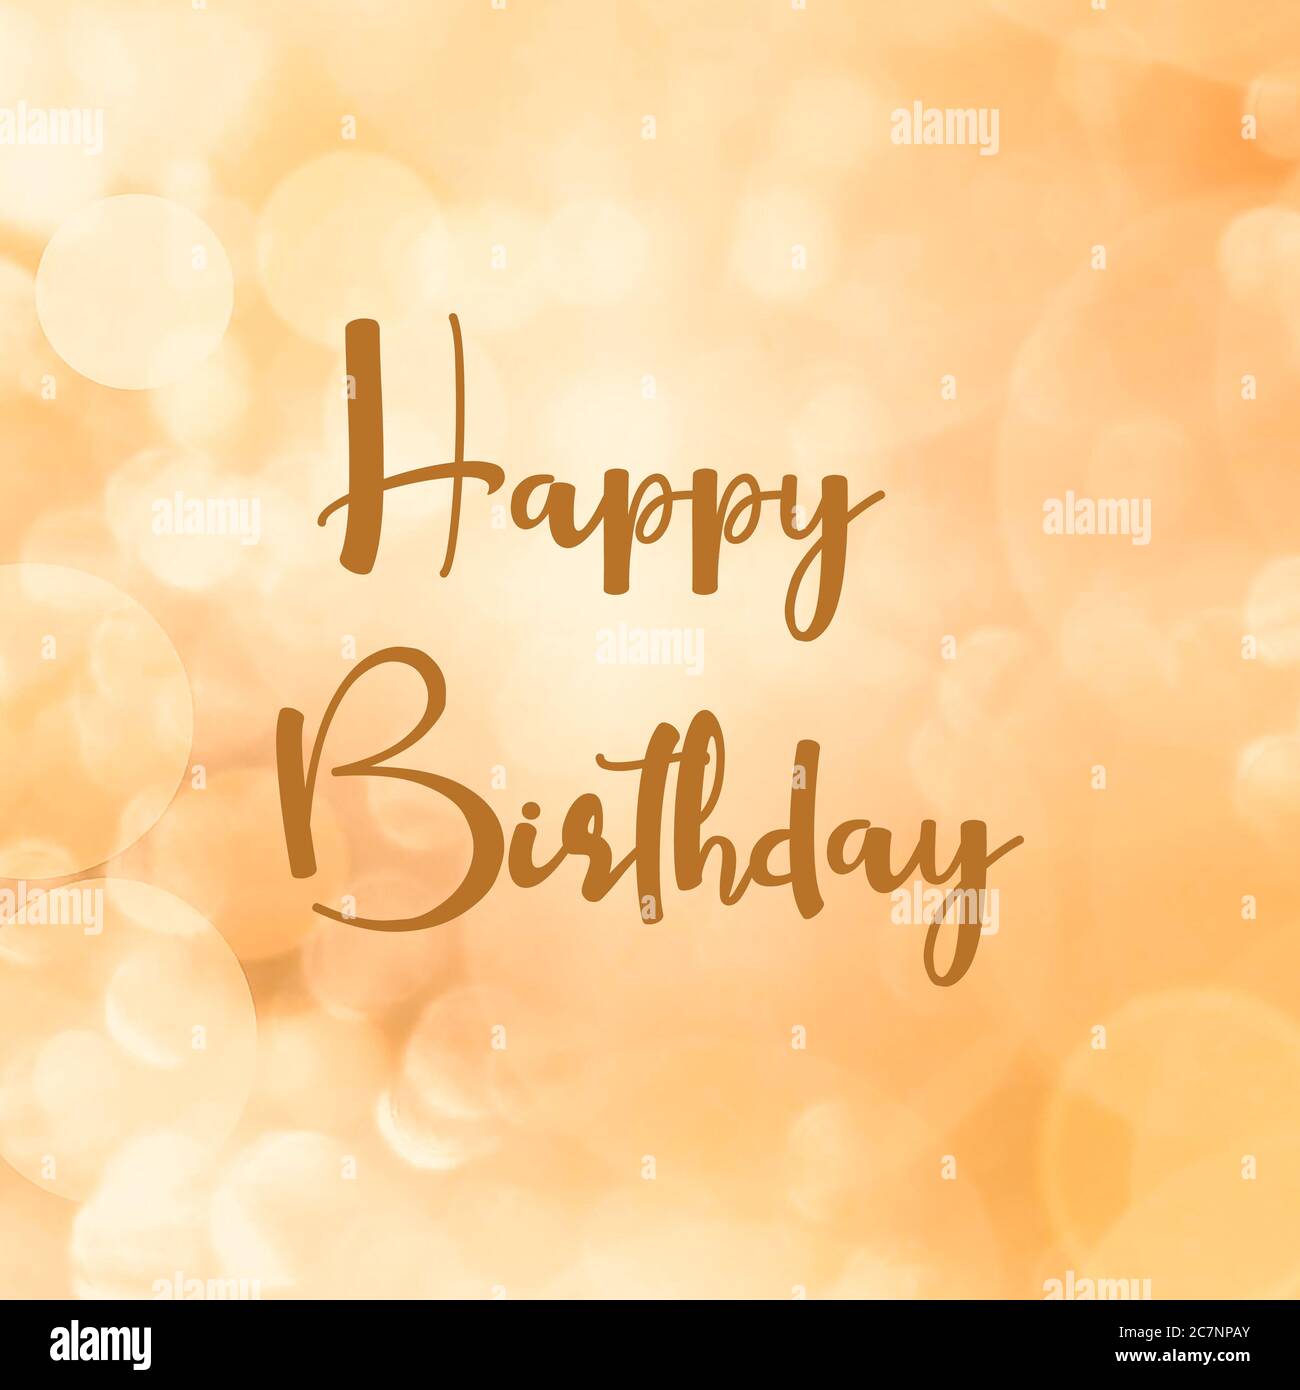 Illustration with the text happy birthday. Colorful Design, poster ...